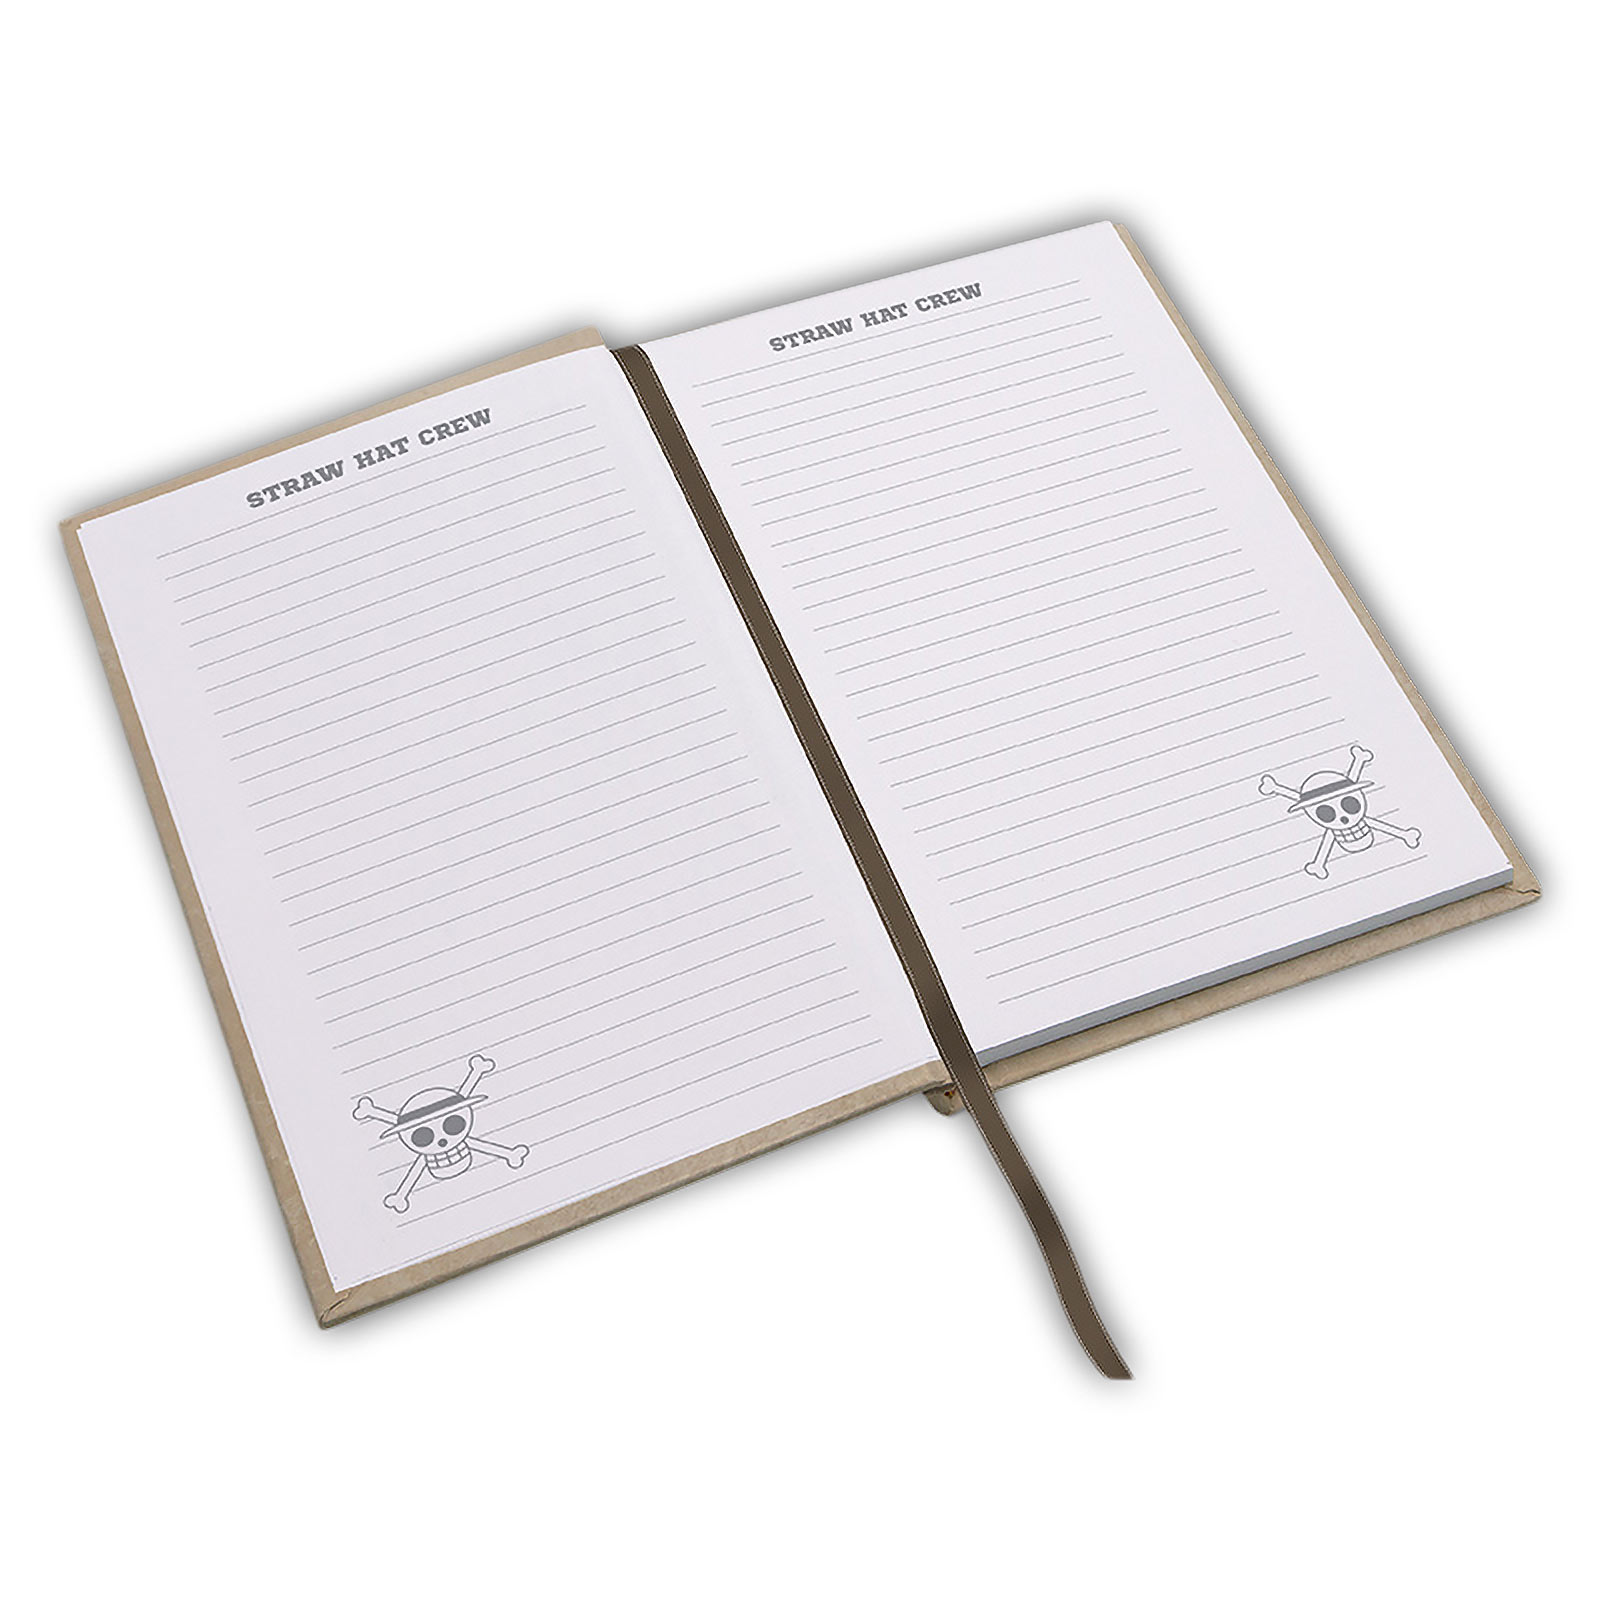 One Piece - Wanted Luffy A5 Notebook